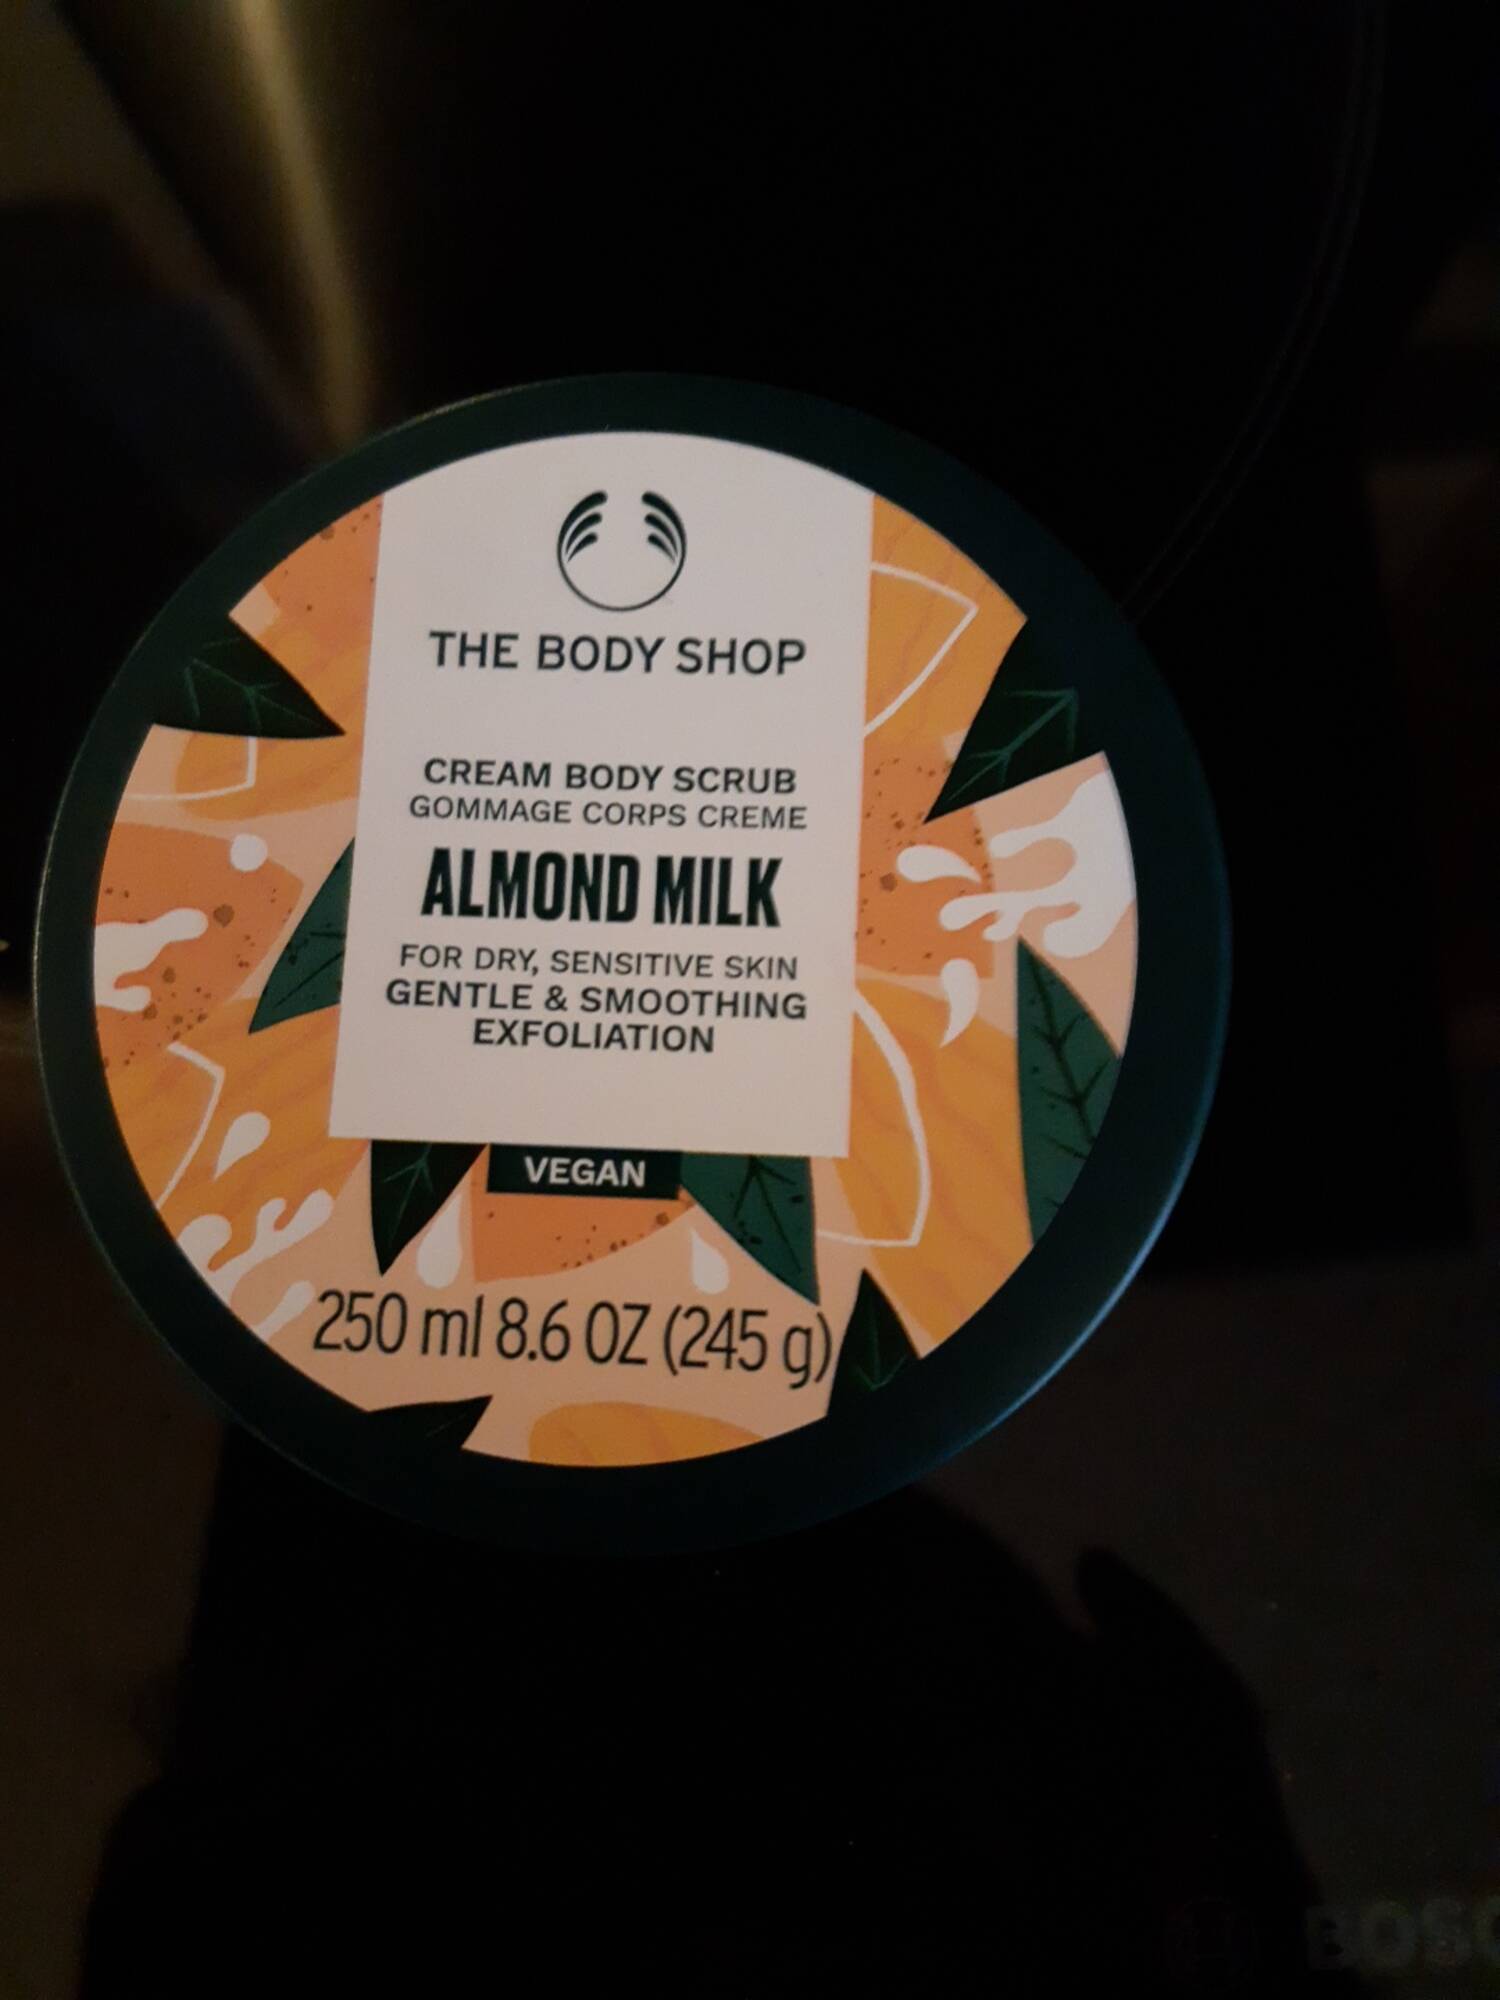 THE BODY SHOP - Almond milk - Gommage corps creme